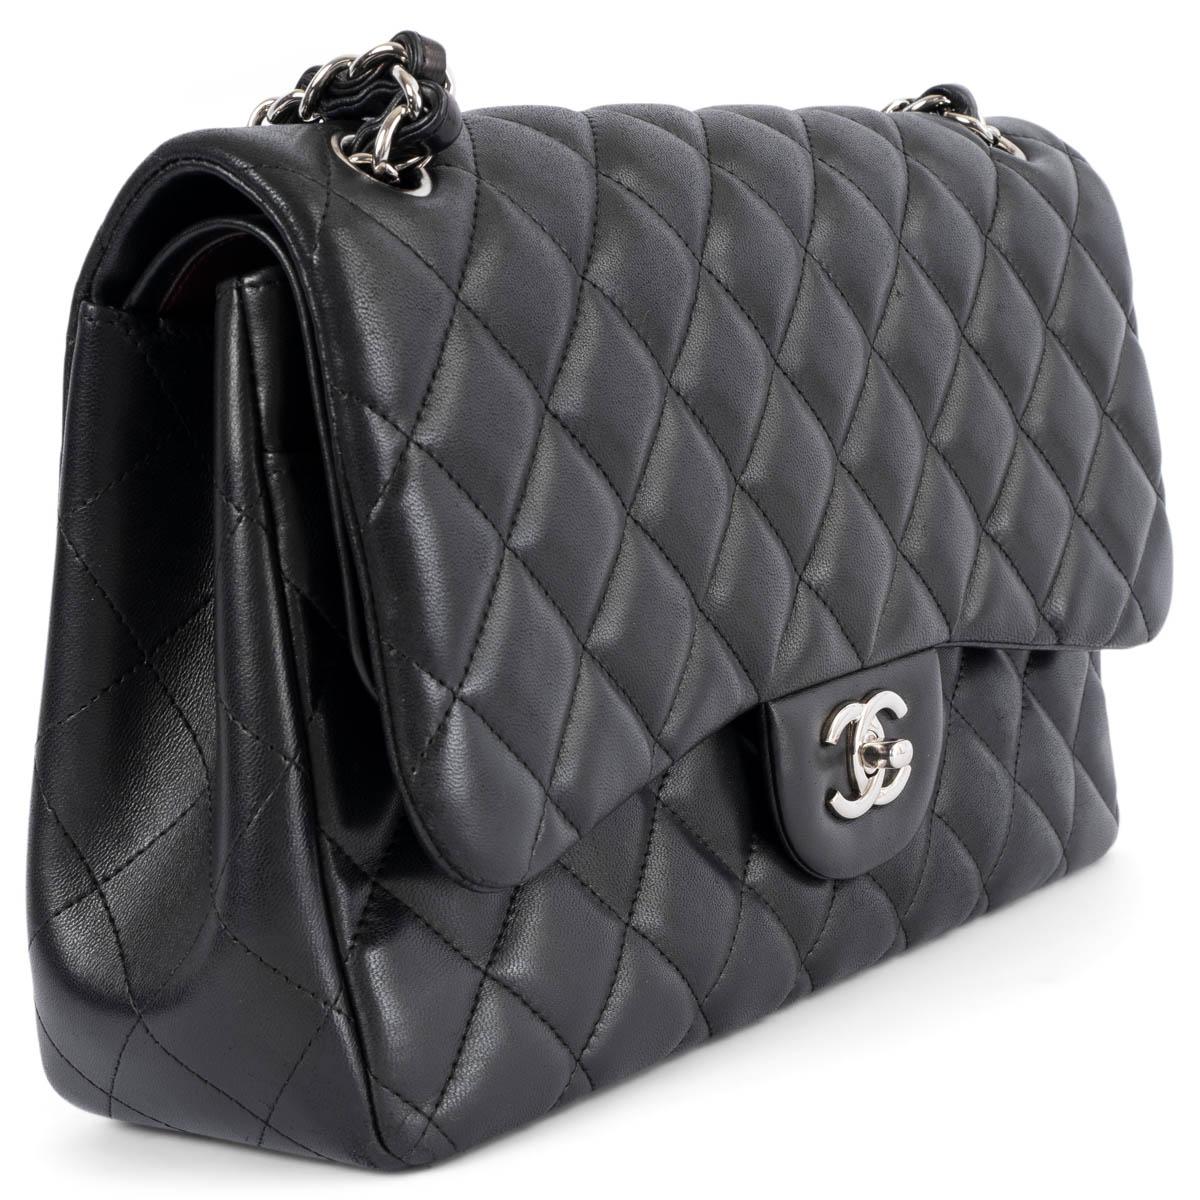 100% authentic Chanel Classic Large Timeless Double Flap shoulder bag in black lambskin featuring silver-tone hardware. Open pocket on the back. Closes with classic CC-turn-lock on the front. Zipper pocket inside the flap. Outside pocket on the